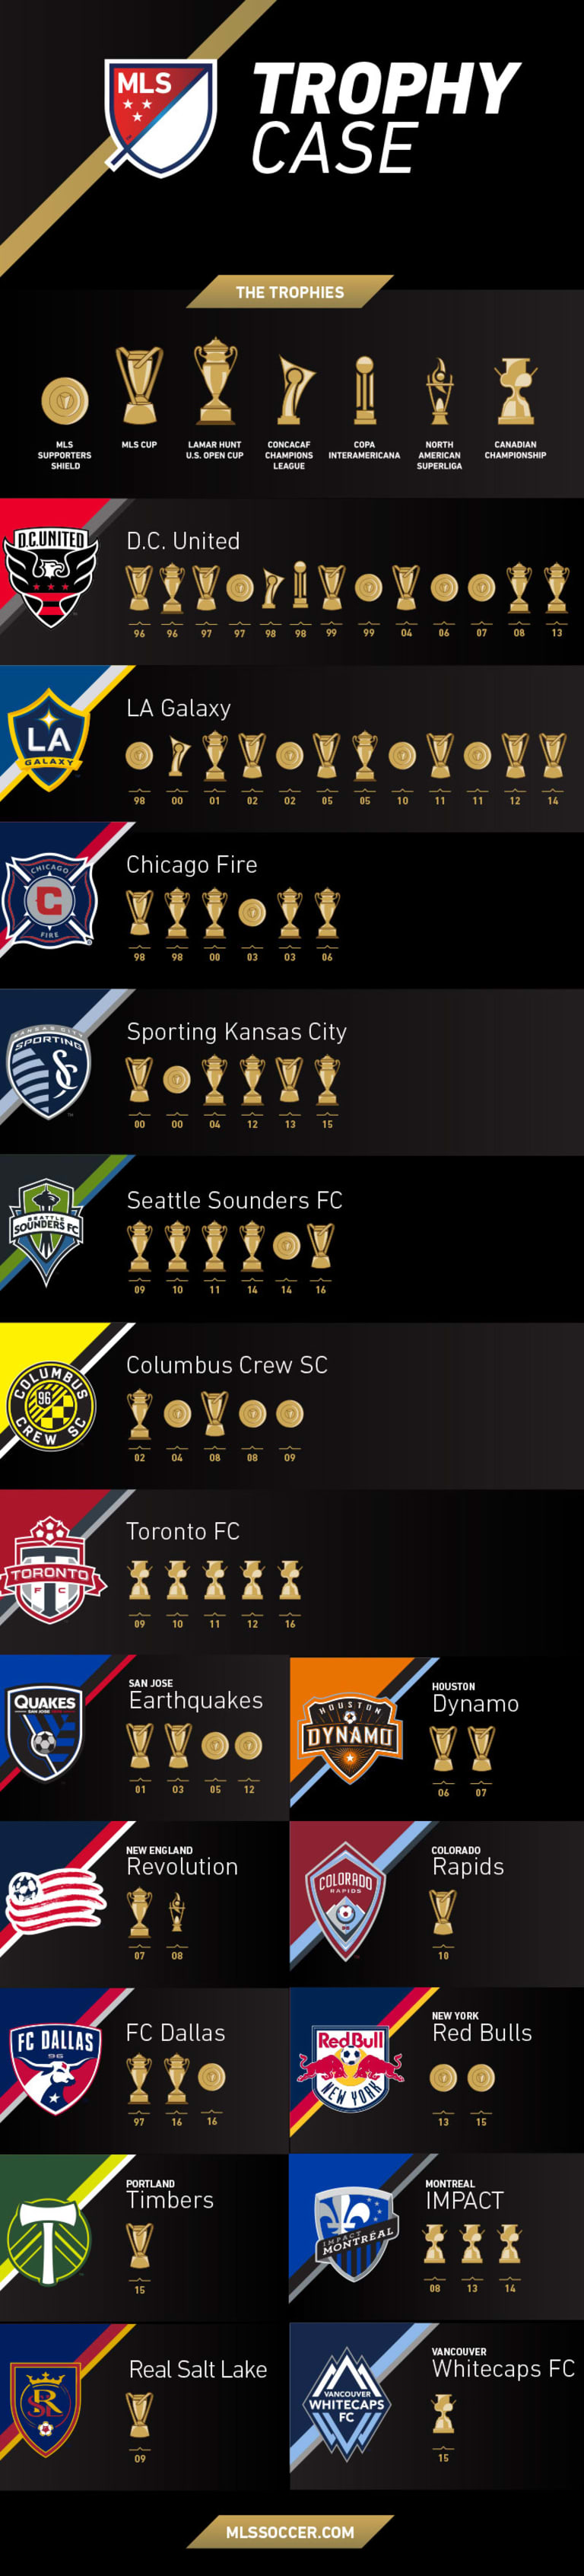 Check out every team's trophy case heading into 2017 - https://league-mp7static.mlsdigital.net/images/MLS-Trophy-Case-3-1-17.jpg